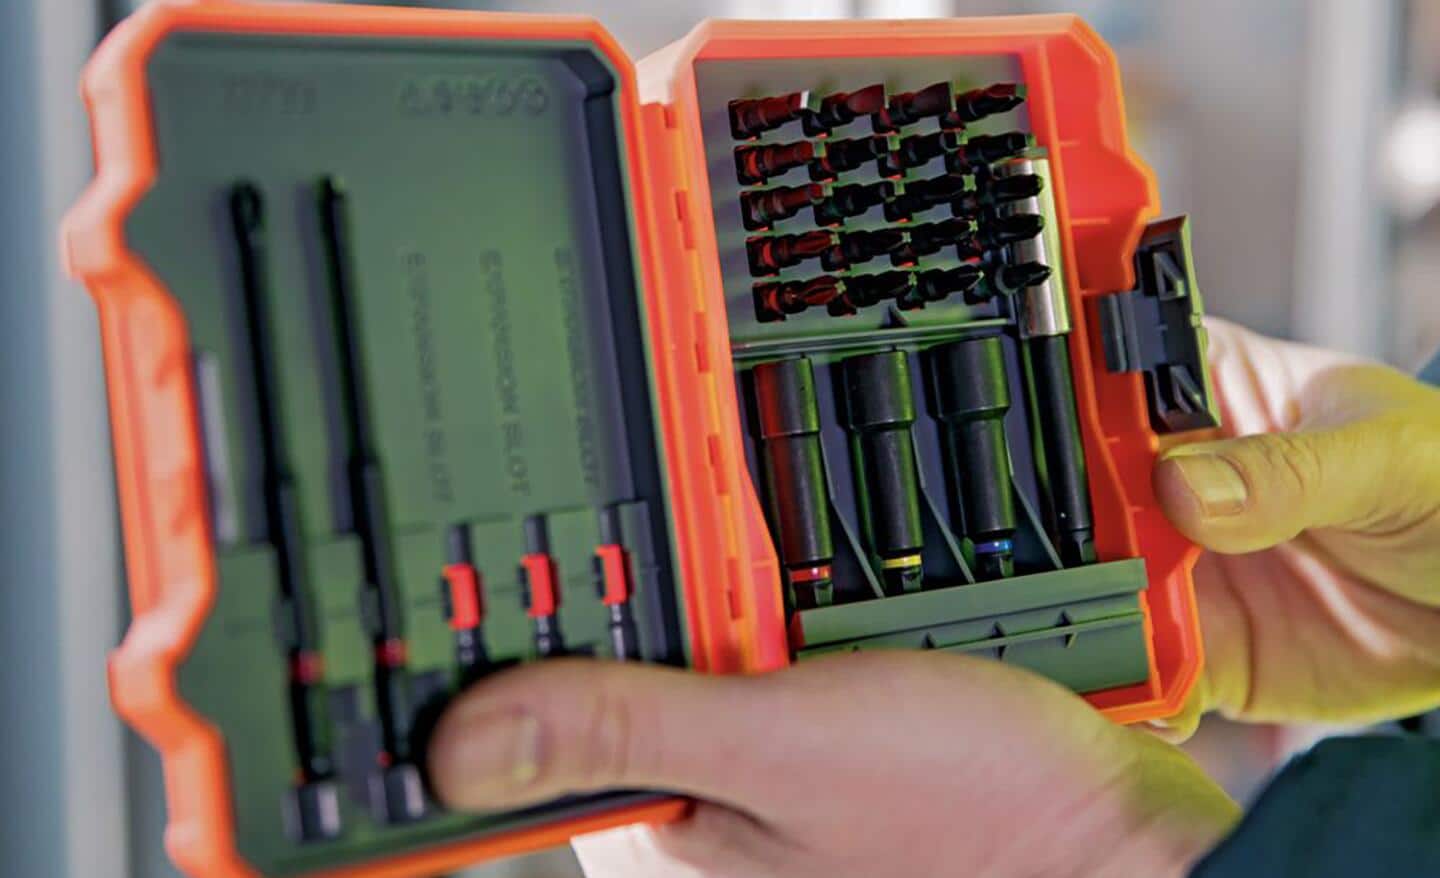 A person holds a drill bit kit with different types of drill bits.